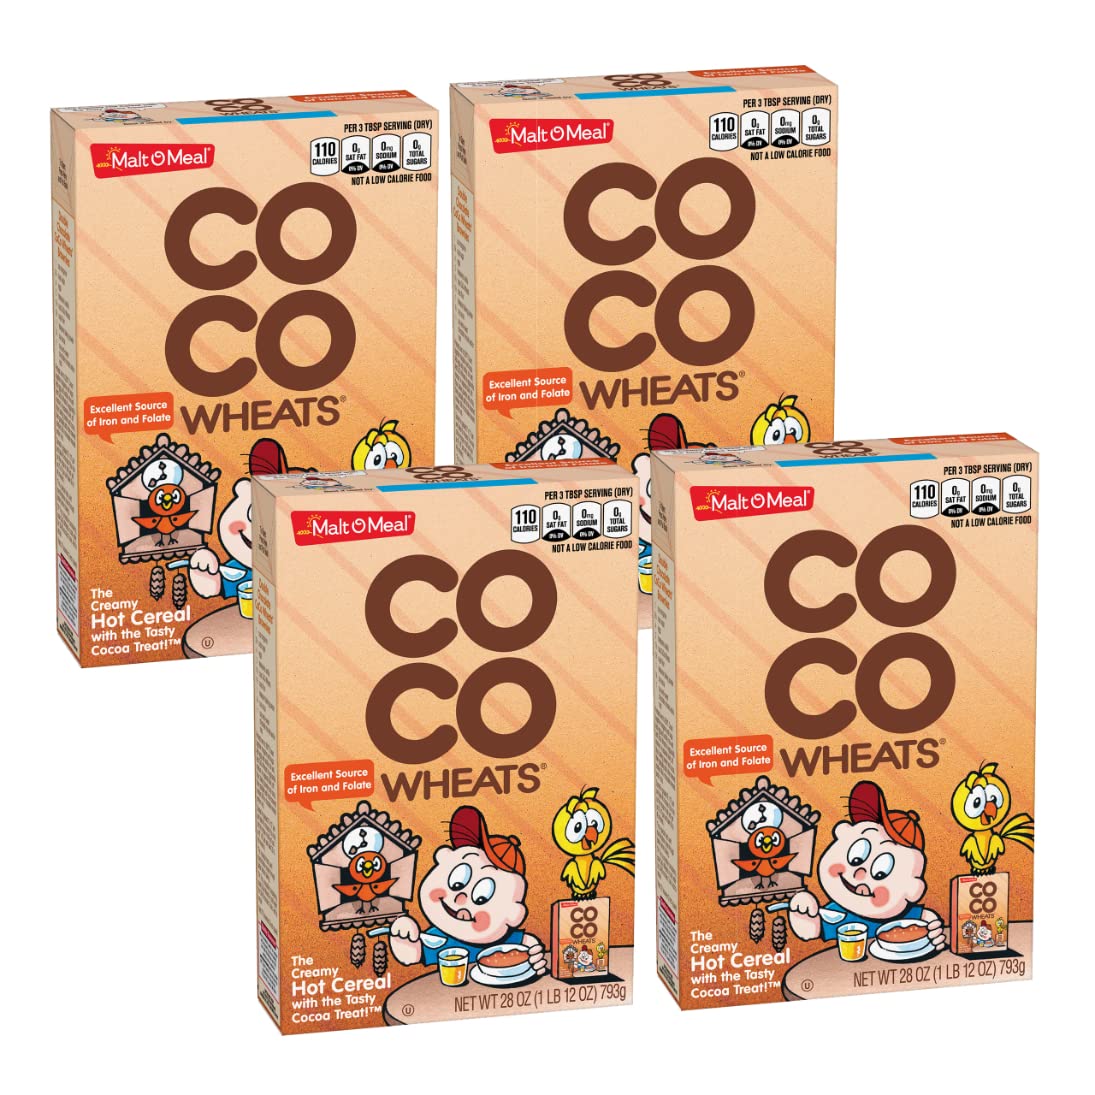 Malt-O-Meal Original Breakfast Cereal COCO Wheats Quick Cooking Kosher 28 Ounce Box Pack of 4